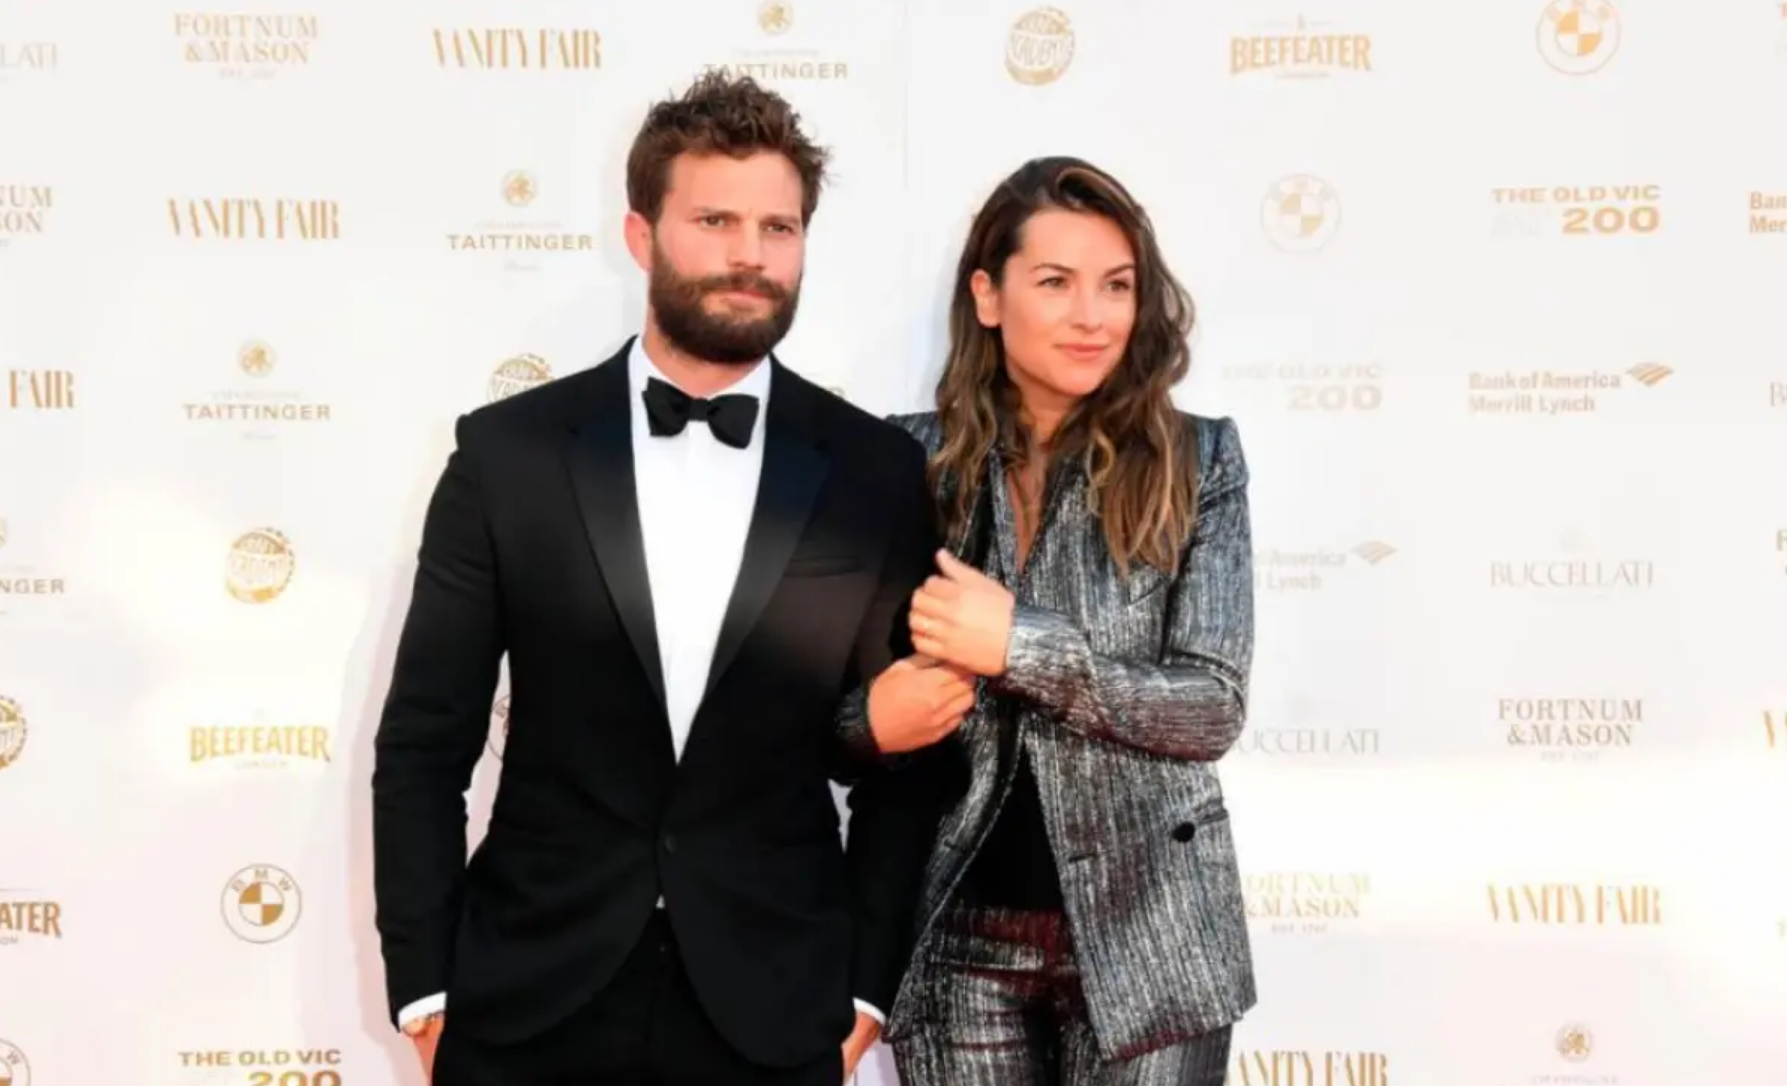 Jamie Dornan and Amelia Warner attend The Old Vic Bicentenary Ball 